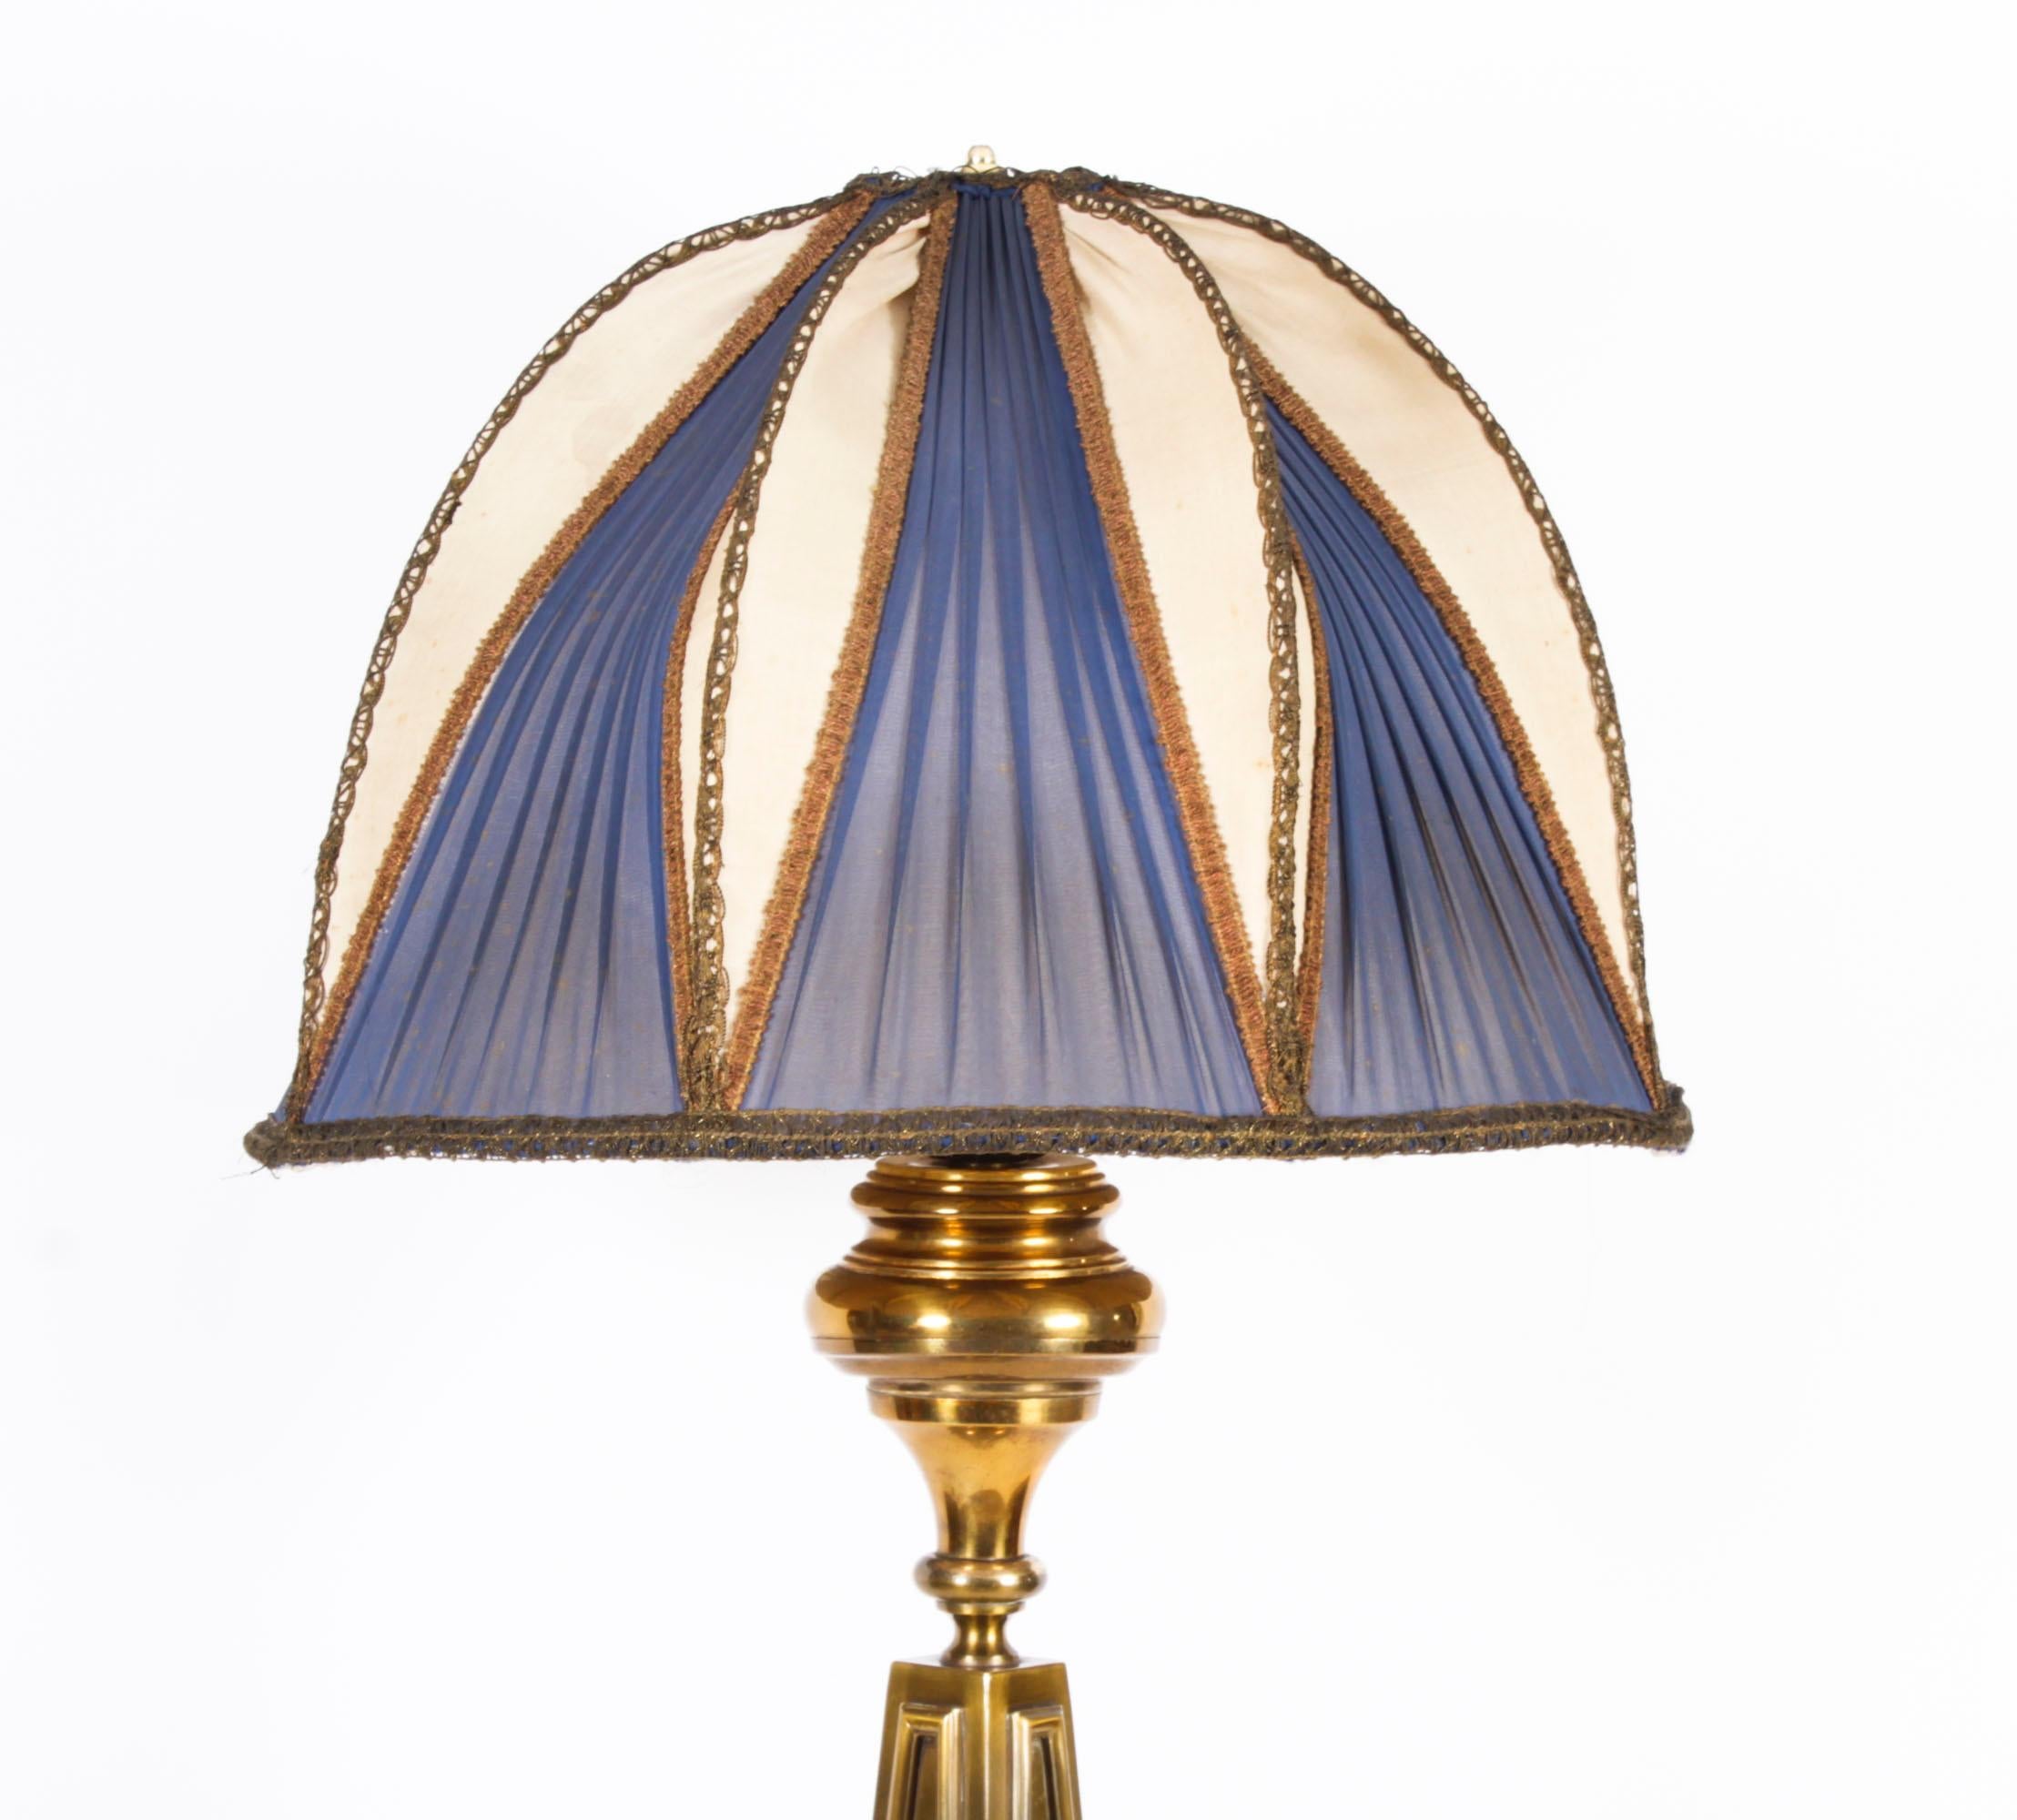 Antique French Art Deco Standard Lamp with Shade Circa 1920 For Sale 6